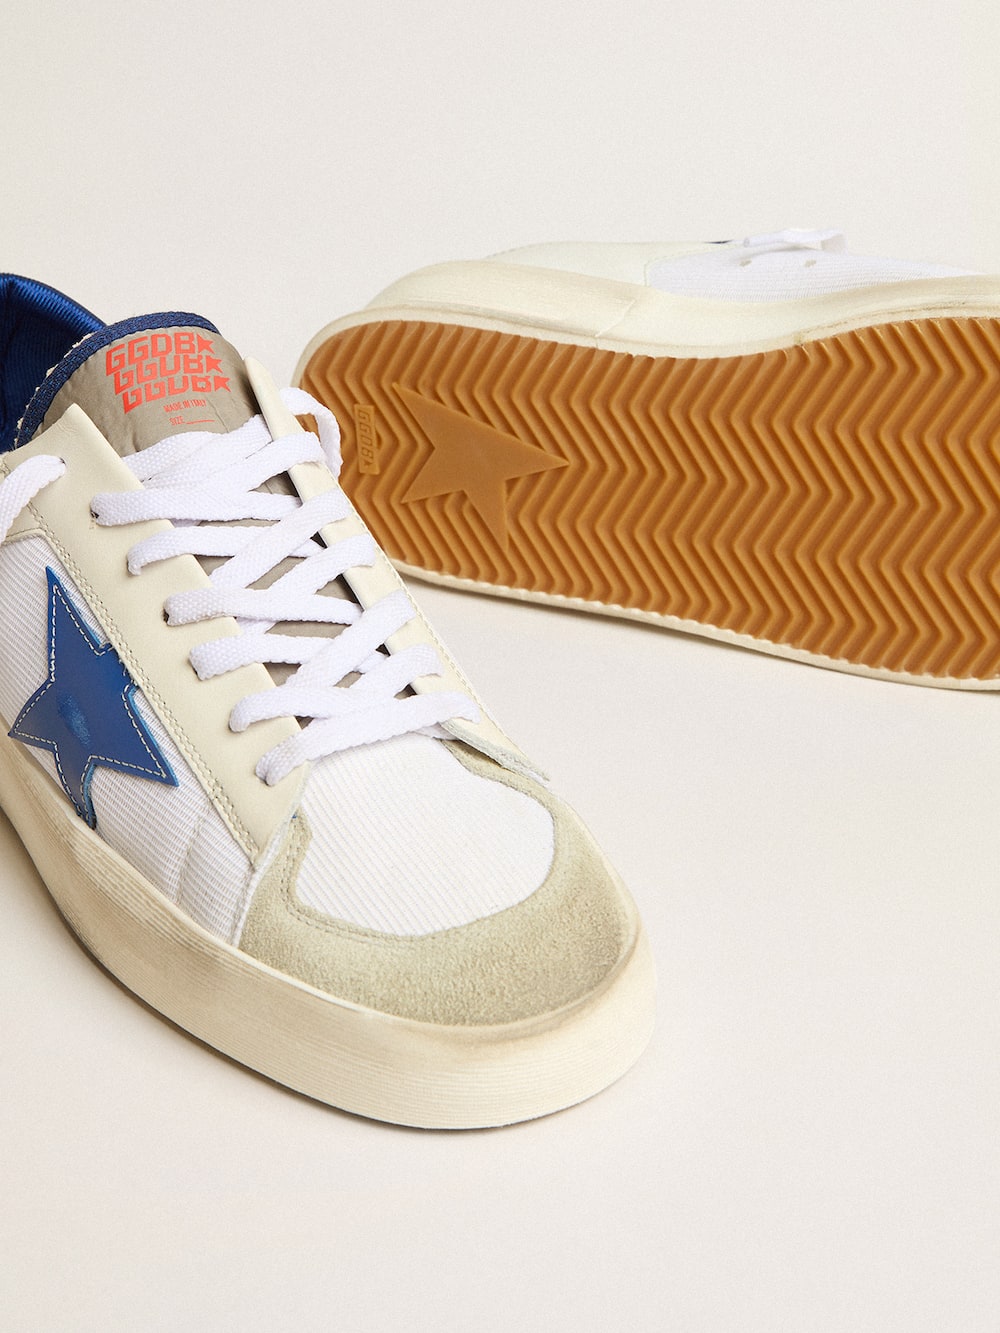 Golden Goose - Stardan LTD in white mesh and leather with blue star and white heel tab in 